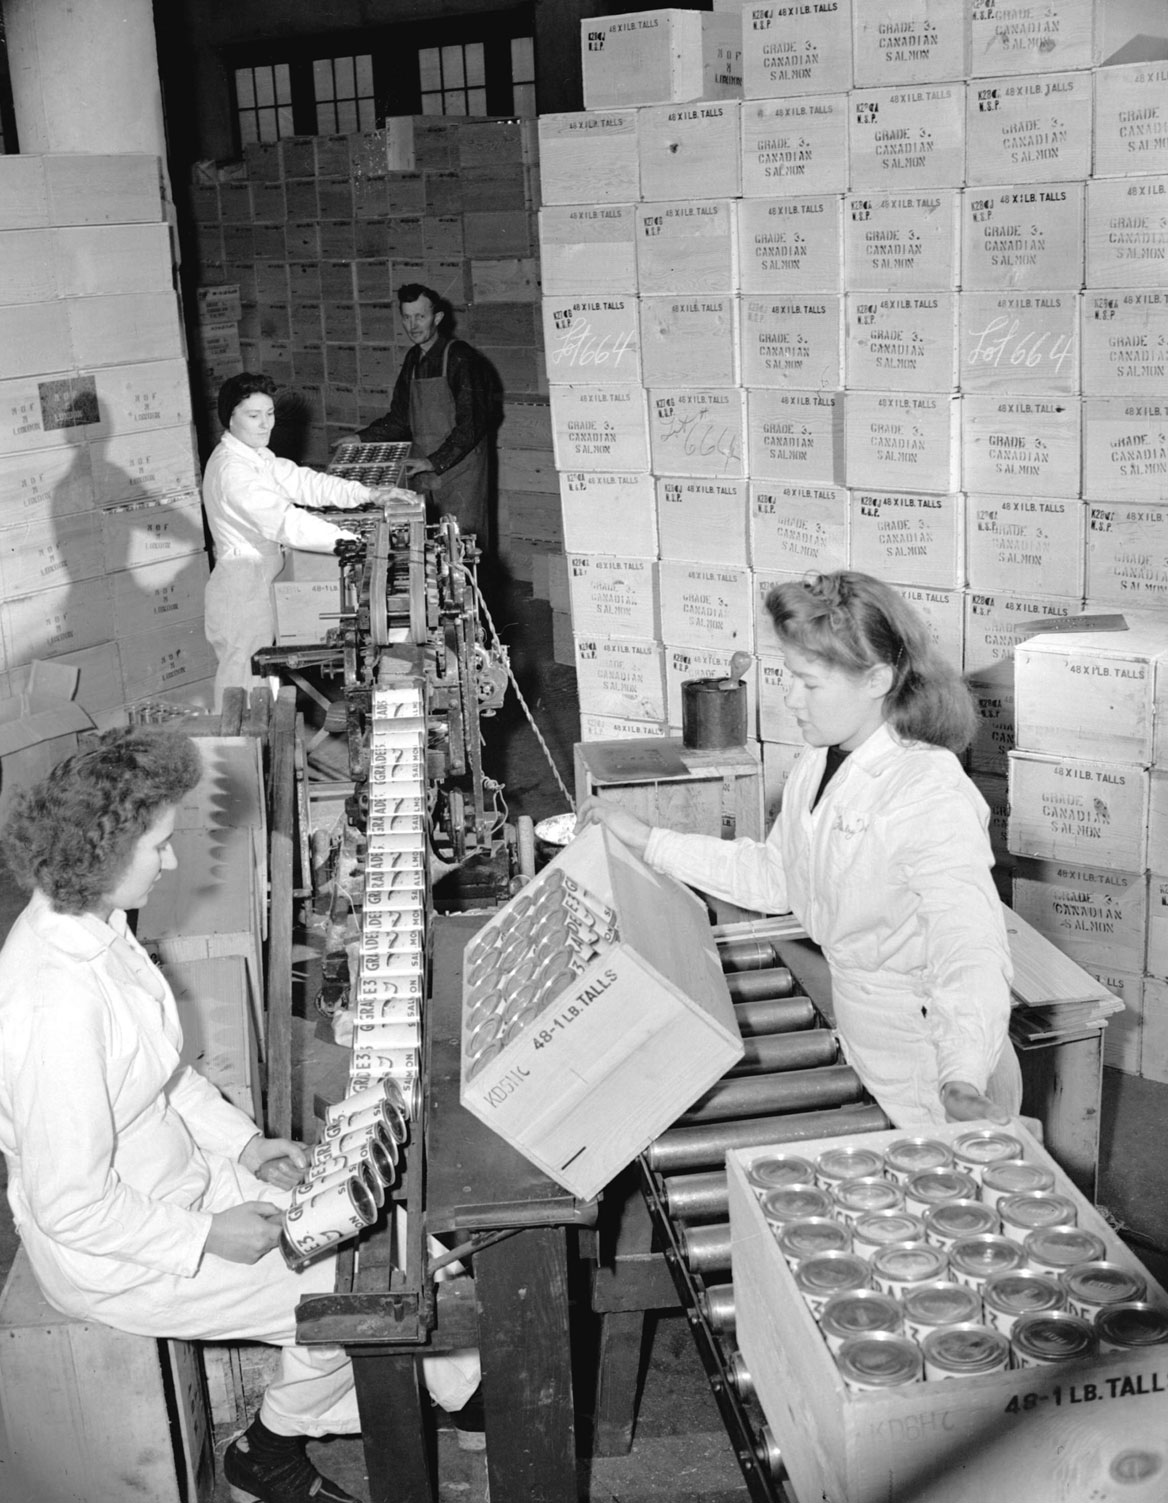 Workers labeling and crating one pound cans. Crates are stacked to the ceiling in the background.